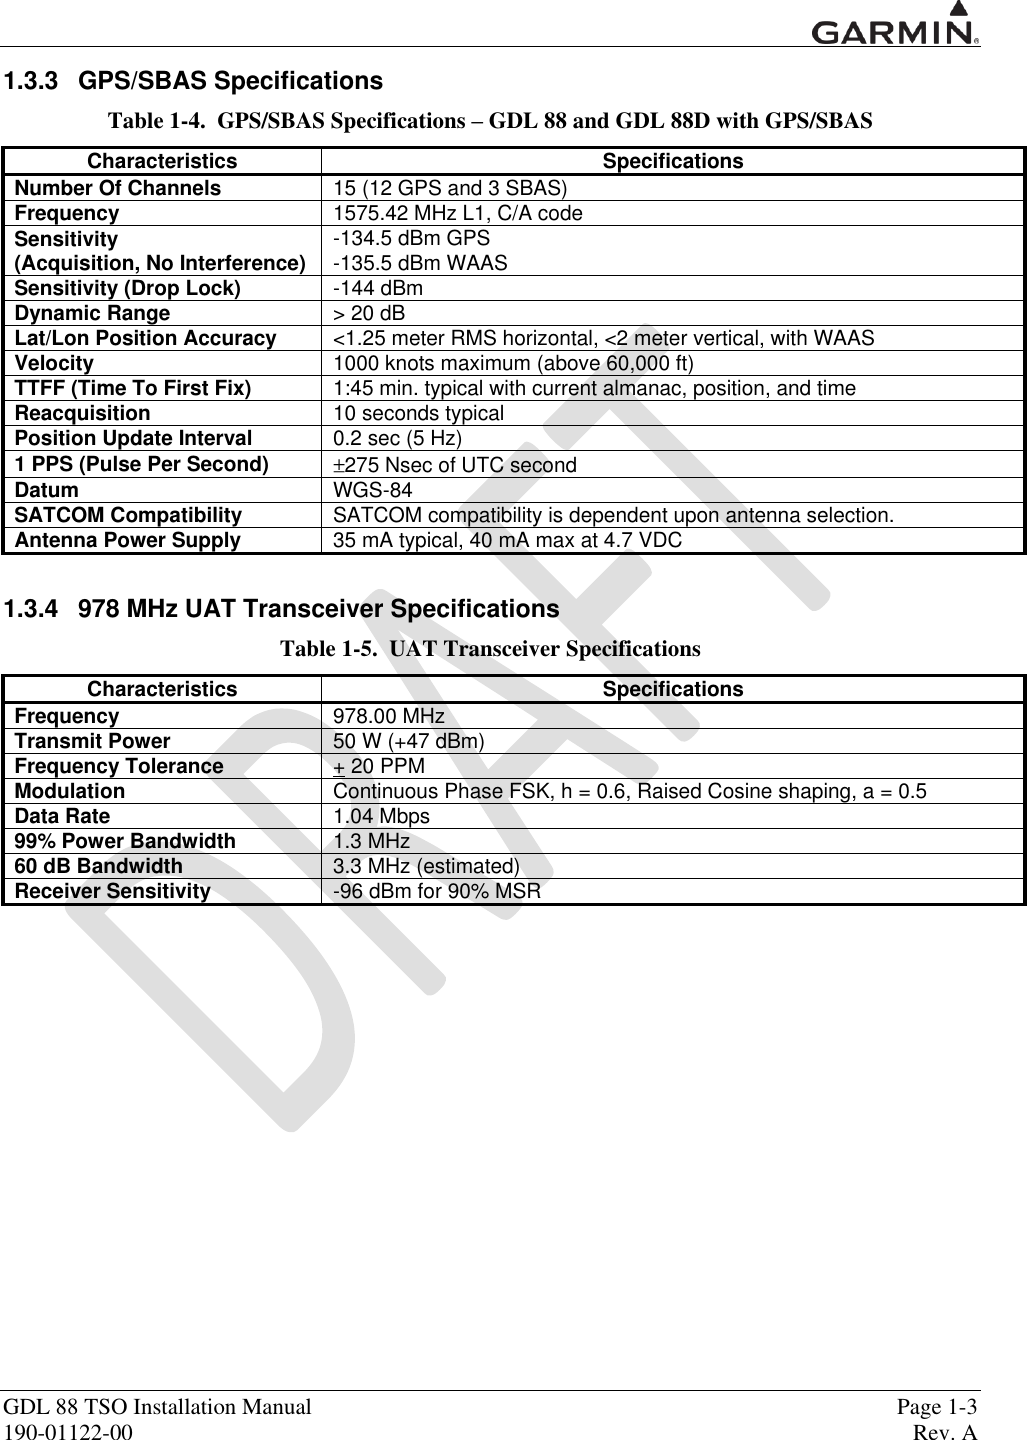  GDL 88 TSO Installation Manual    Page 1-3 190-01122-00  Rev. A  1.3.3  GPS/SBAS Specifications Table 1-4.  GPS/SBAS Specifications – GDL 88 and GDL 88D with GPS/SBAS Characteristics Specifications Number Of Channels 15 (12 GPS and 3 SBAS) Frequency 1575.42 MHz L1, C/A code Sensitivity  (Acquisition, No Interference) -134.5 dBm GPS -135.5 dBm WAAS Sensitivity (Drop Lock) -144 dBm Dynamic Range &gt; 20 dB Lat/Lon Position Accuracy &lt;1.25 meter RMS horizontal, &lt;2 meter vertical, with WAAS Velocity 1000 knots maximum (above 60,000 ft) TTFF (Time To First Fix) 1:45 min. typical with current almanac, position, and time Reacquisition 10 seconds typical Position Update Interval 0.2 sec (5 Hz) 1 PPS (Pulse Per Second) 275 Nsec of UTC second Datum WGS-84 SATCOM Compatibility SATCOM compatibility is dependent upon antenna selection.  Antenna Power Supply 35 mA typical, 40 mA max at 4.7 VDC  1.3.4  978 MHz UAT Transceiver Specifications Table 1-5.  UAT Transceiver Specifications Characteristics Specifications Frequency 978.00 MHz Transmit Power 50 W (+47 dBm) Frequency Tolerance + 20 PPM Modulation Continuous Phase FSK, h = 0.6, Raised Cosine shaping, a = 0.5 Data Rate 1.04 Mbps 99% Power Bandwidth 1.3 MHz 60 dB Bandwidth 3.3 MHz (estimated) Receiver Sensitivity -96 dBm for 90% MSR   